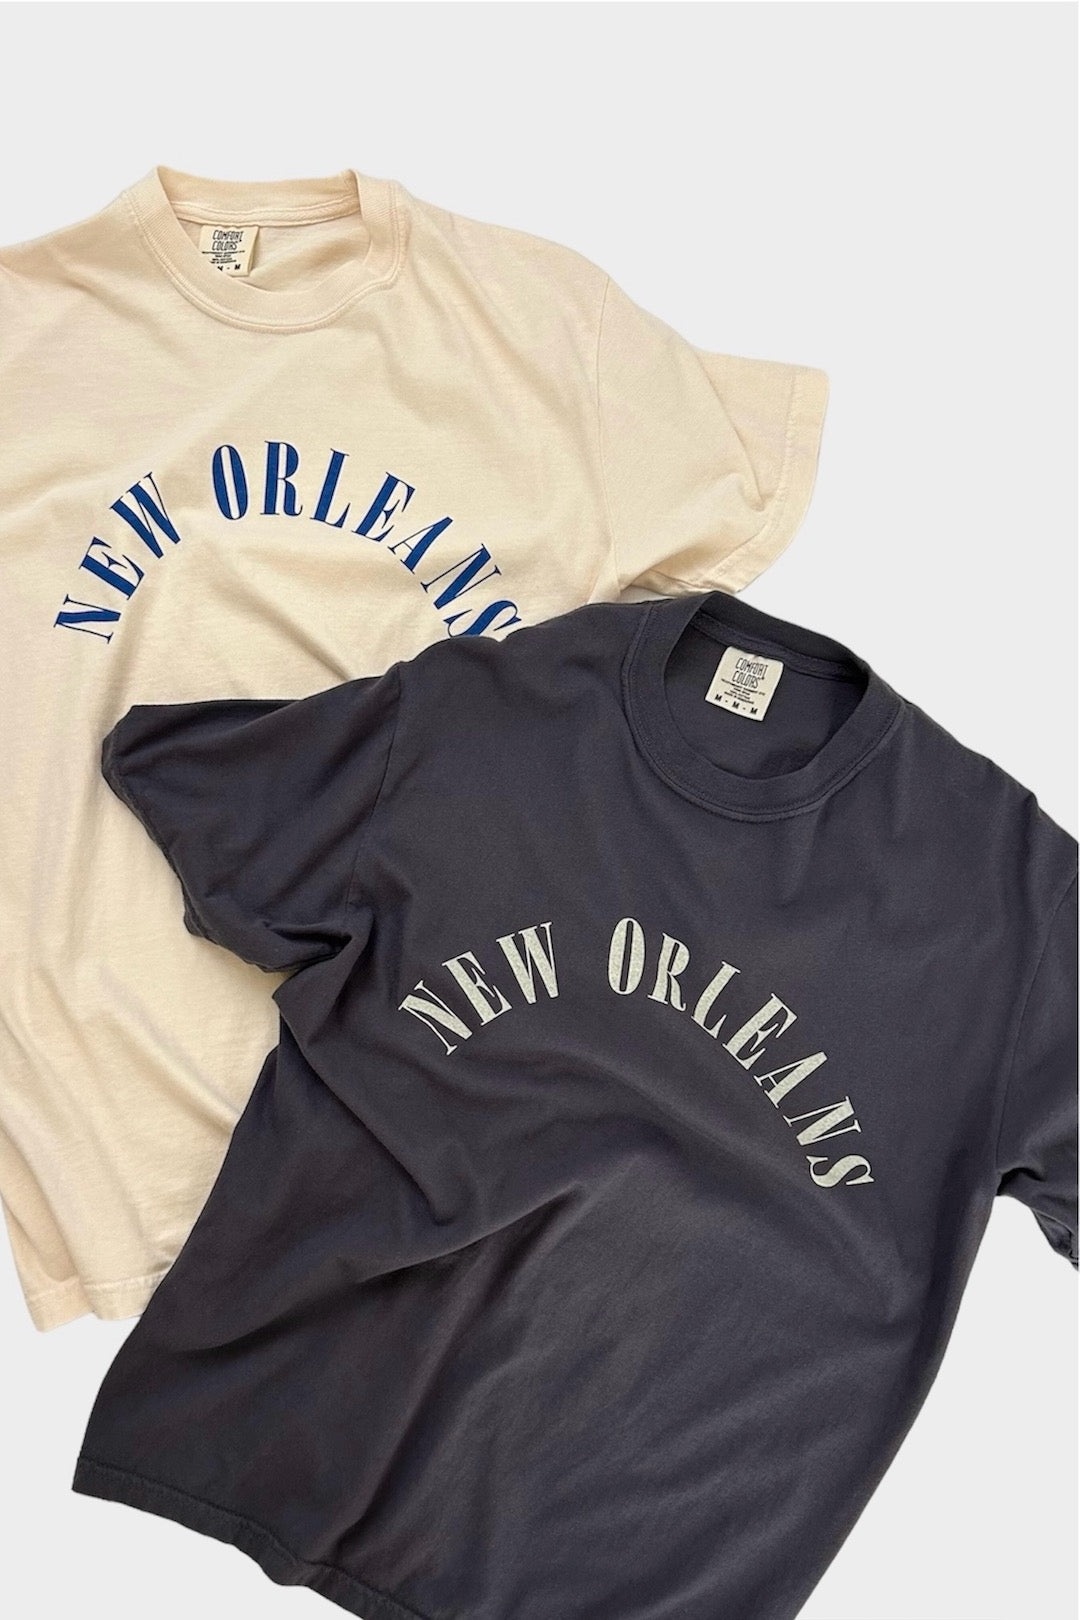 New Orleans 92 T-Shirt – Charcoal#color_charcoal